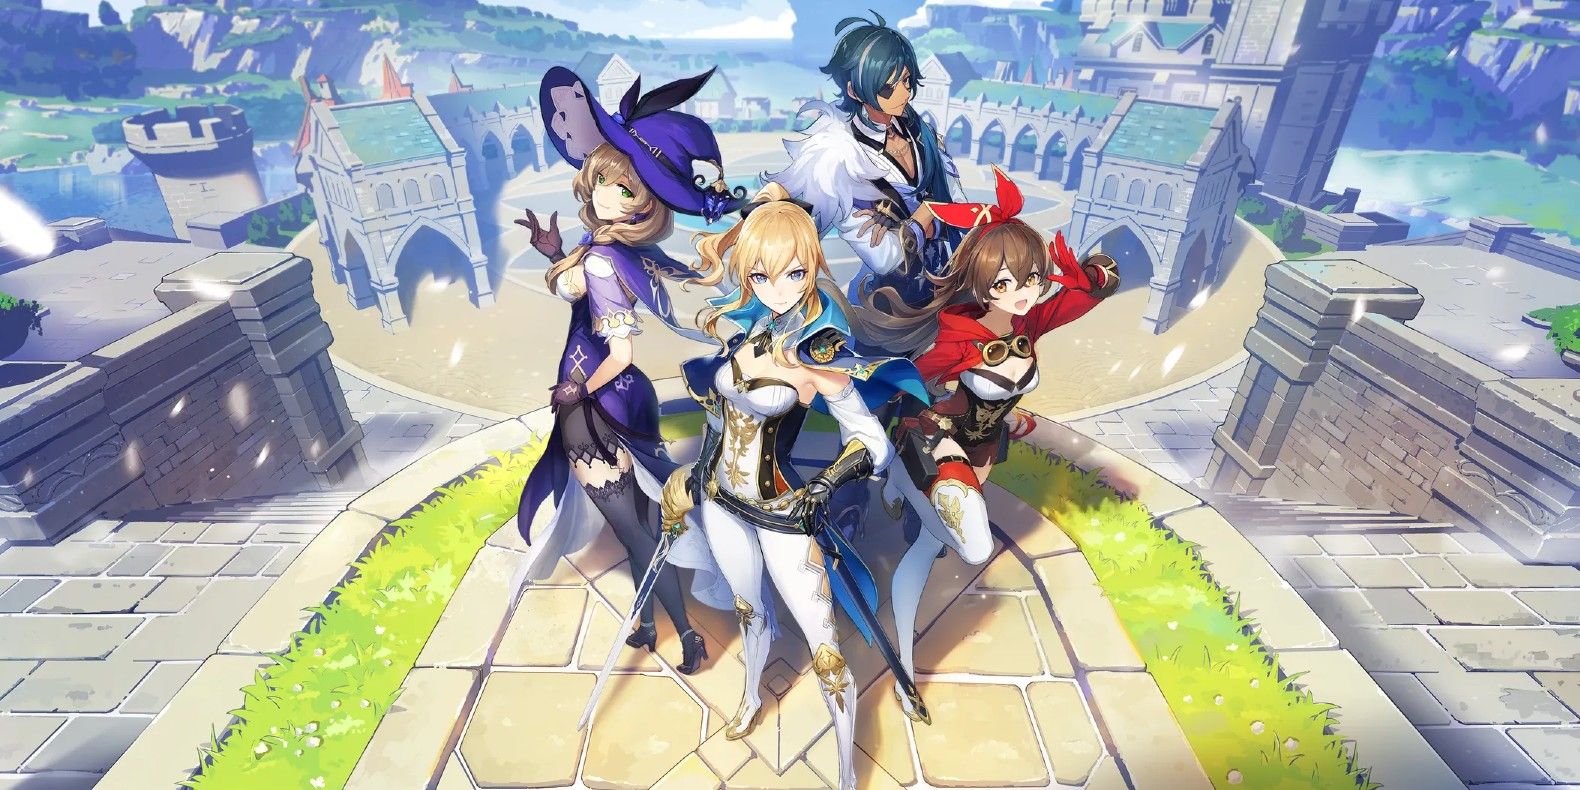 Genshin Impact's main artwork, showing Mondstadt's Lisa, Kaeya, Amber, and Jean standing in front of the city's upper square.